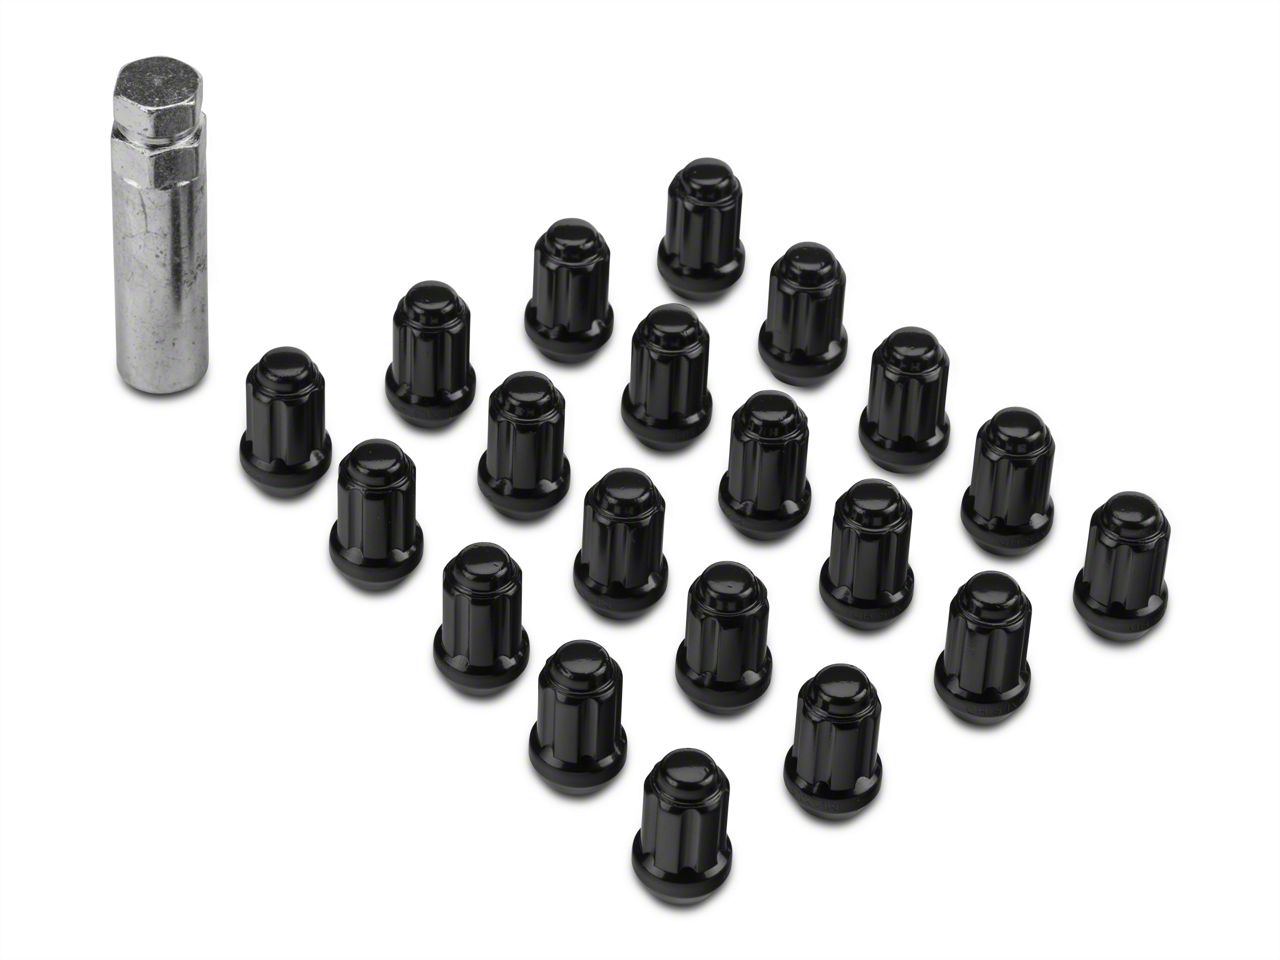 Black Locking Wheel Nuts 14x1.5 Bolts for Ford Mustang 15-16 Mk6